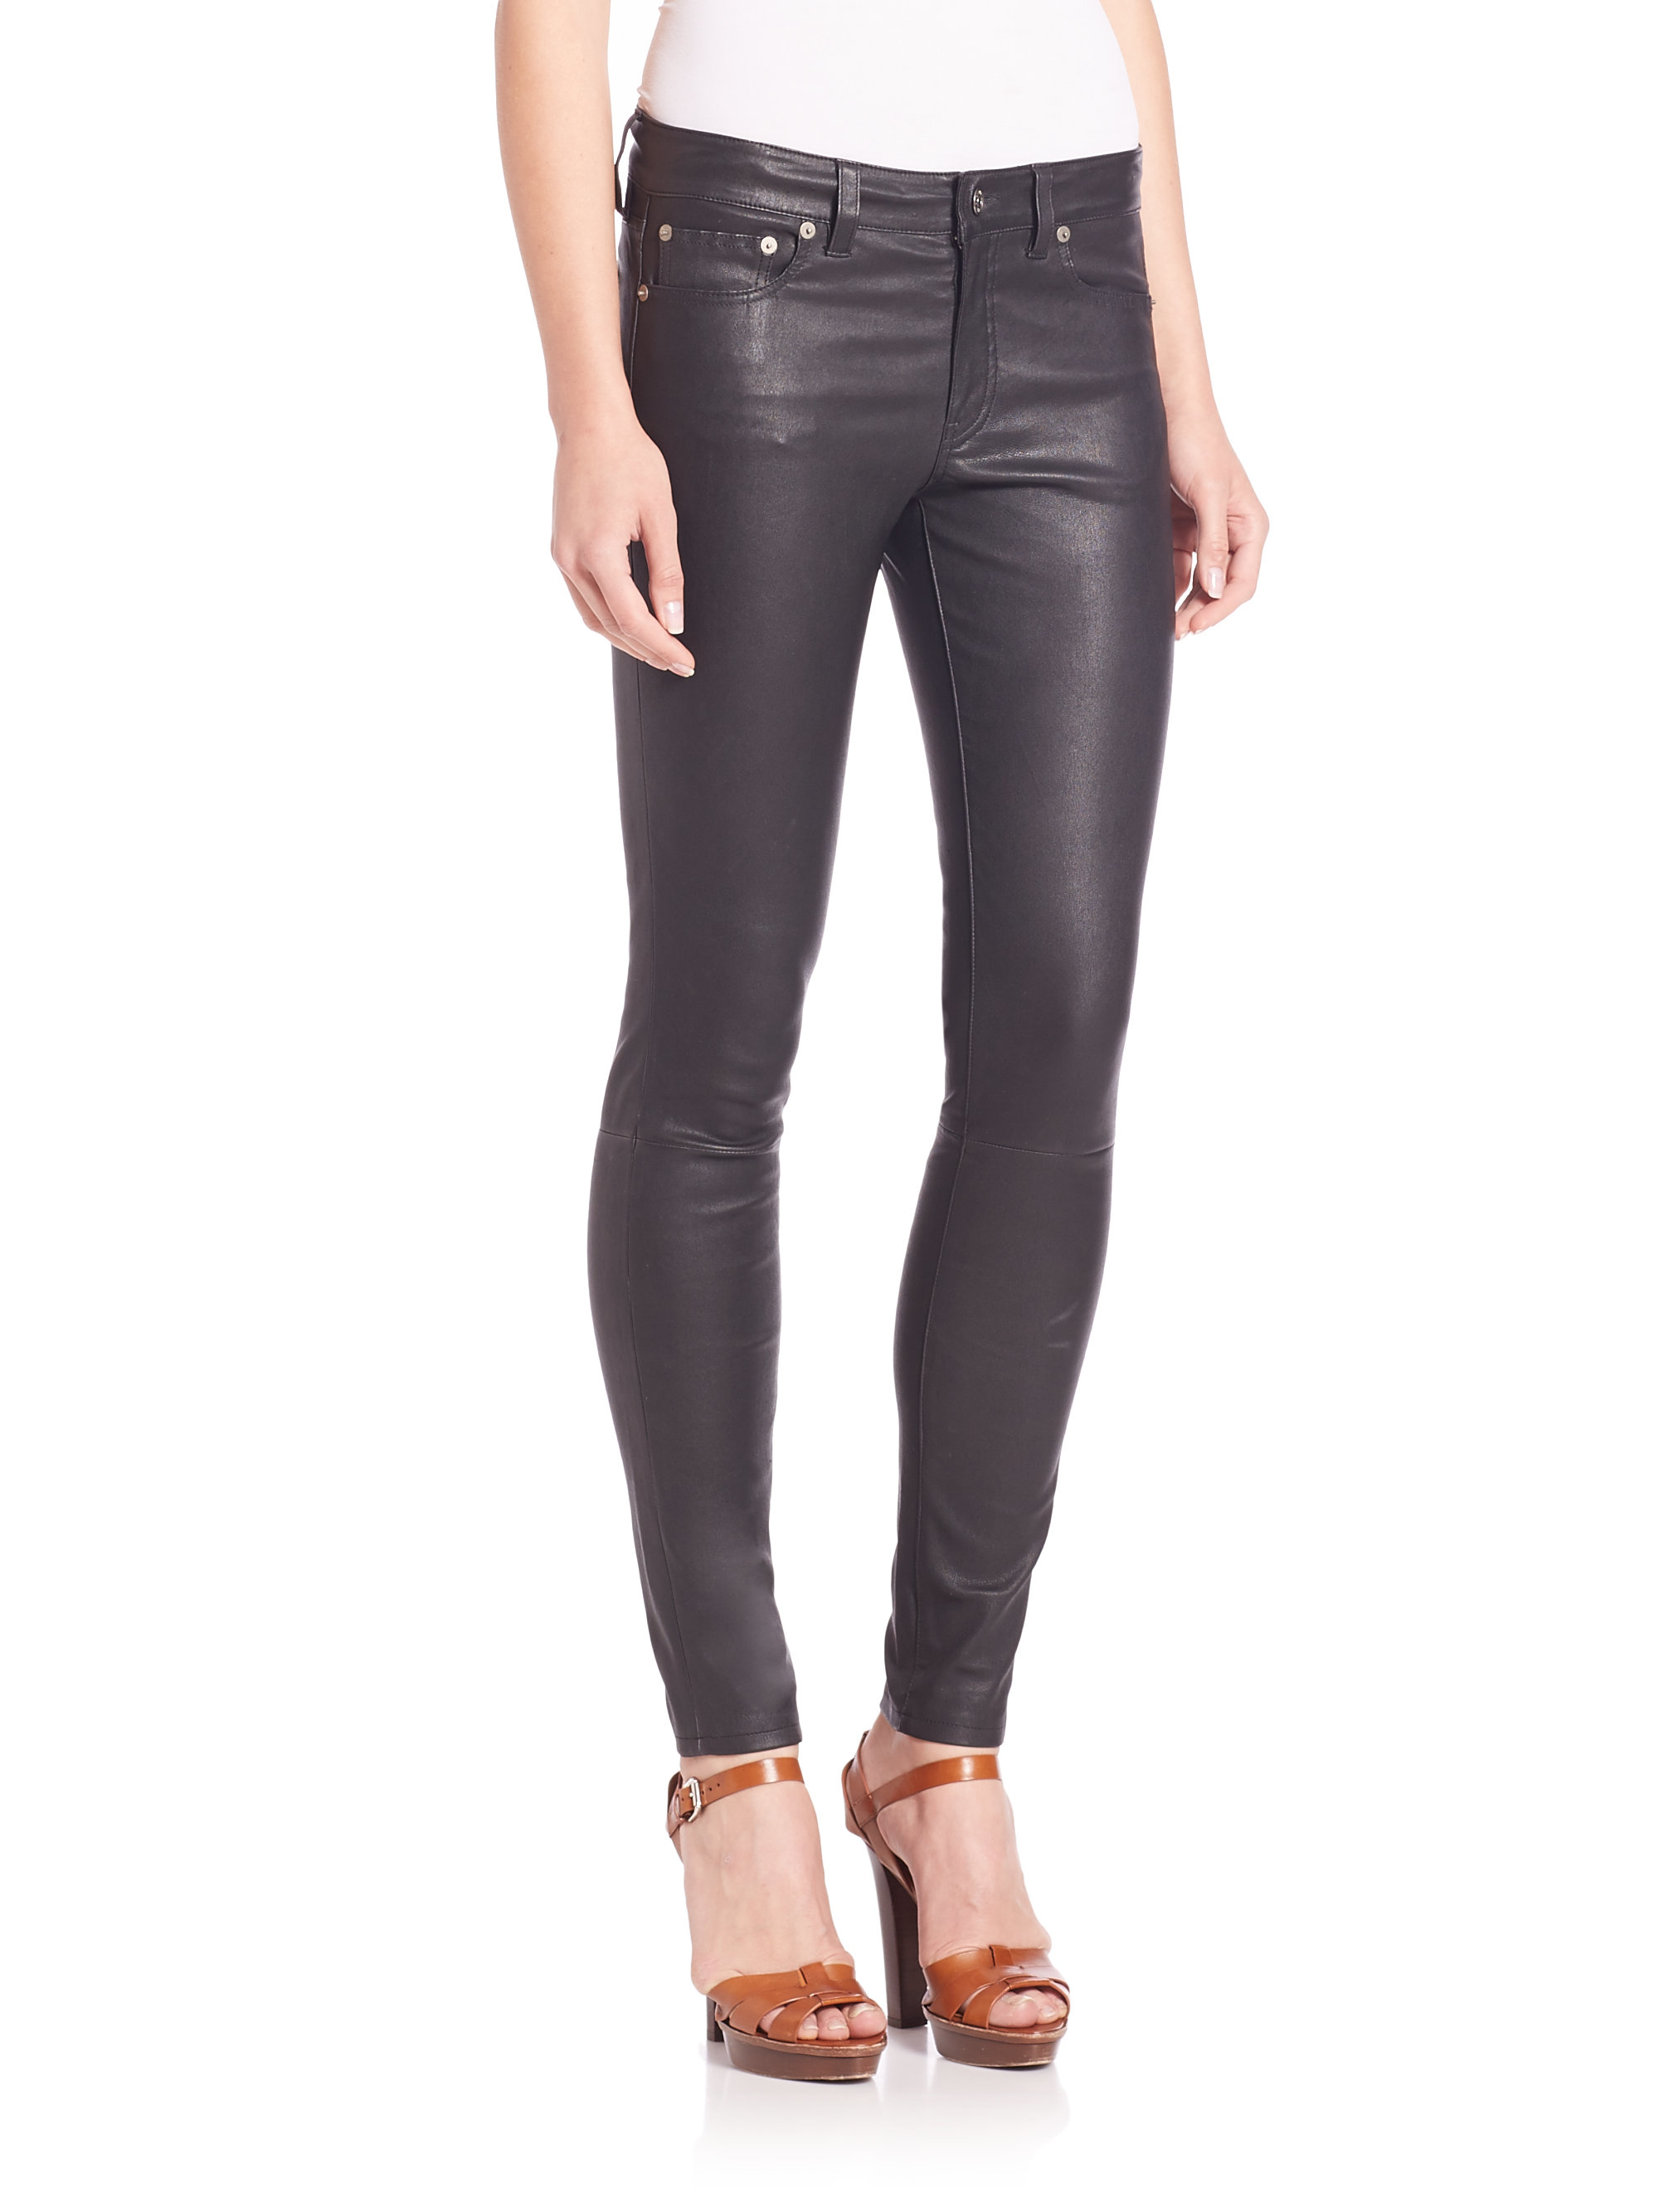 Lyst - Polo Ralph Lauren Stretch-leather Skinny Pants in Black